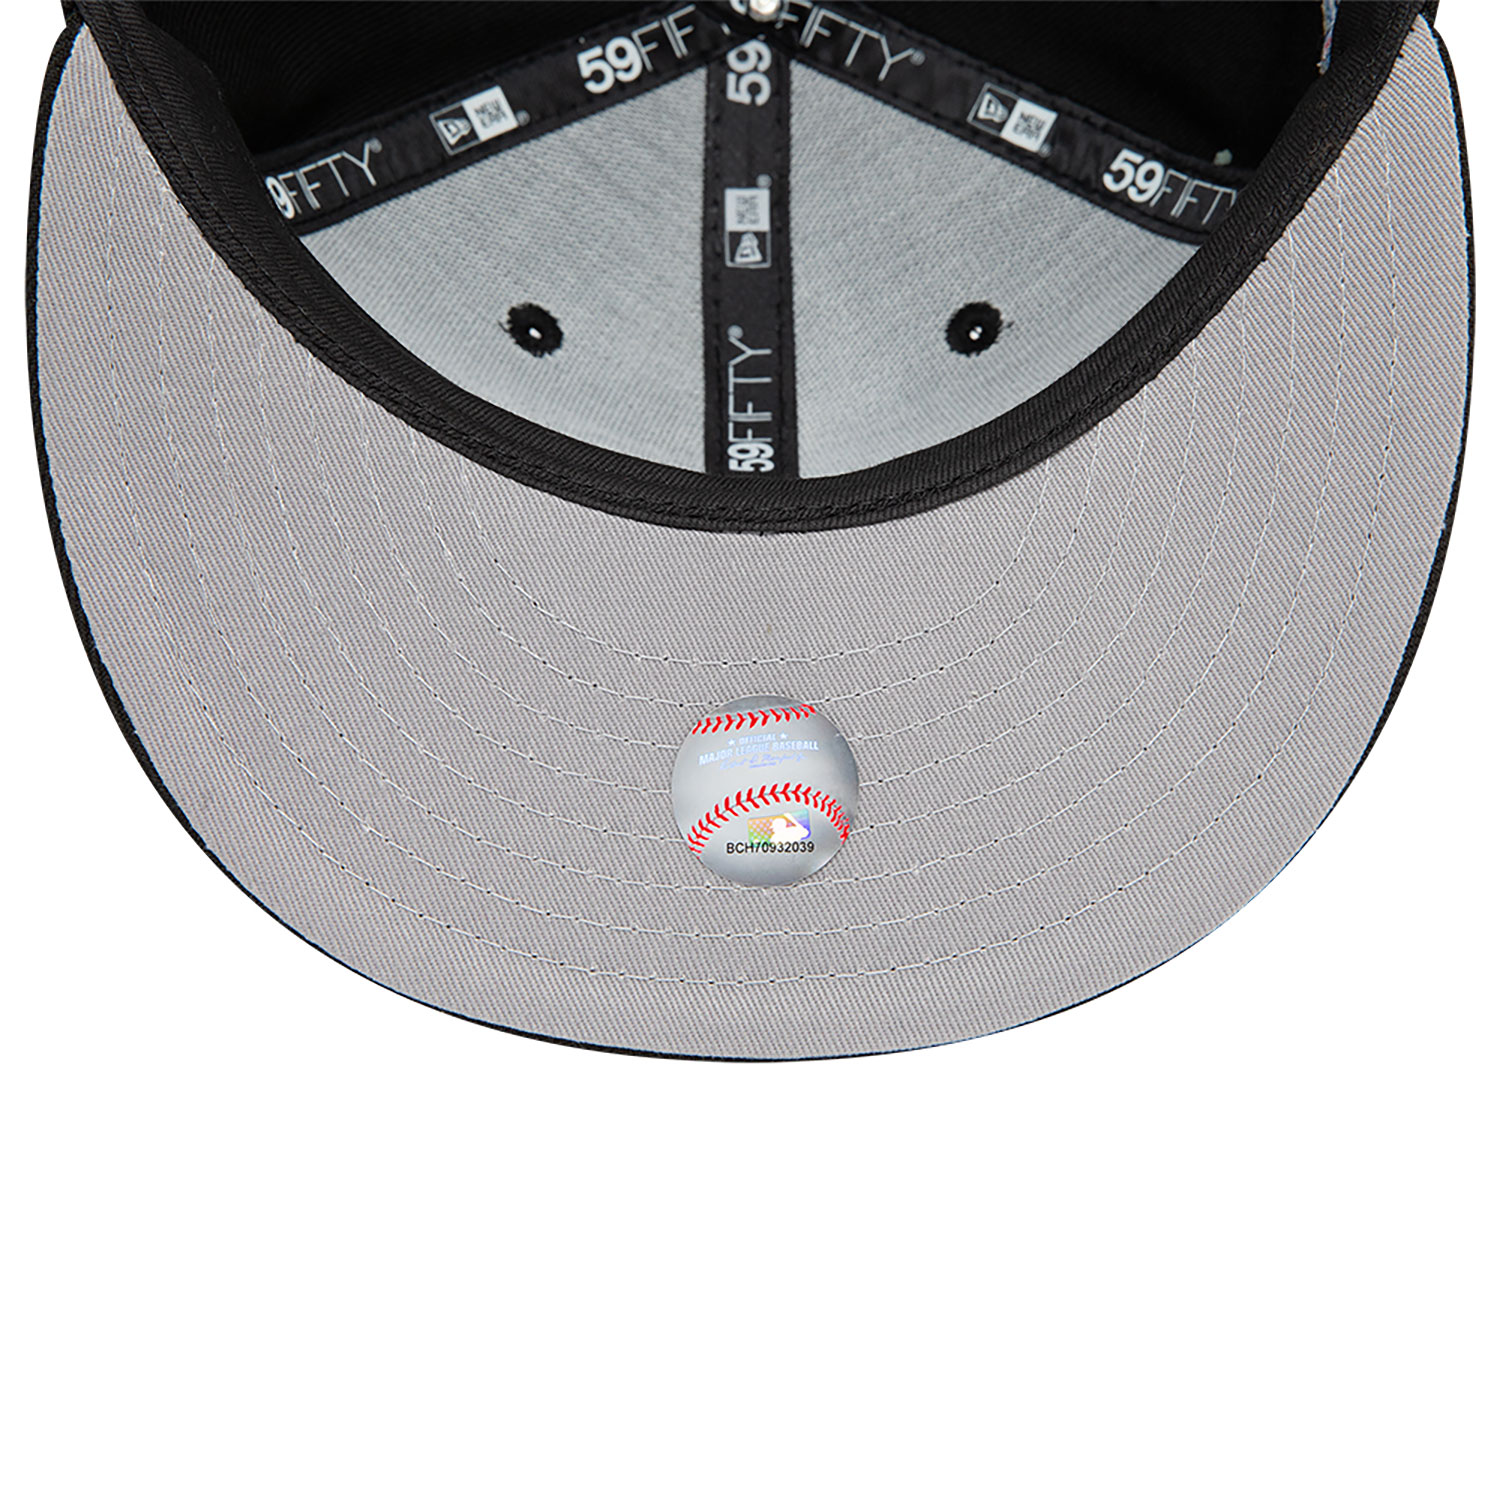 Anaheim Angels Black 59FIFTY Fitted Cap